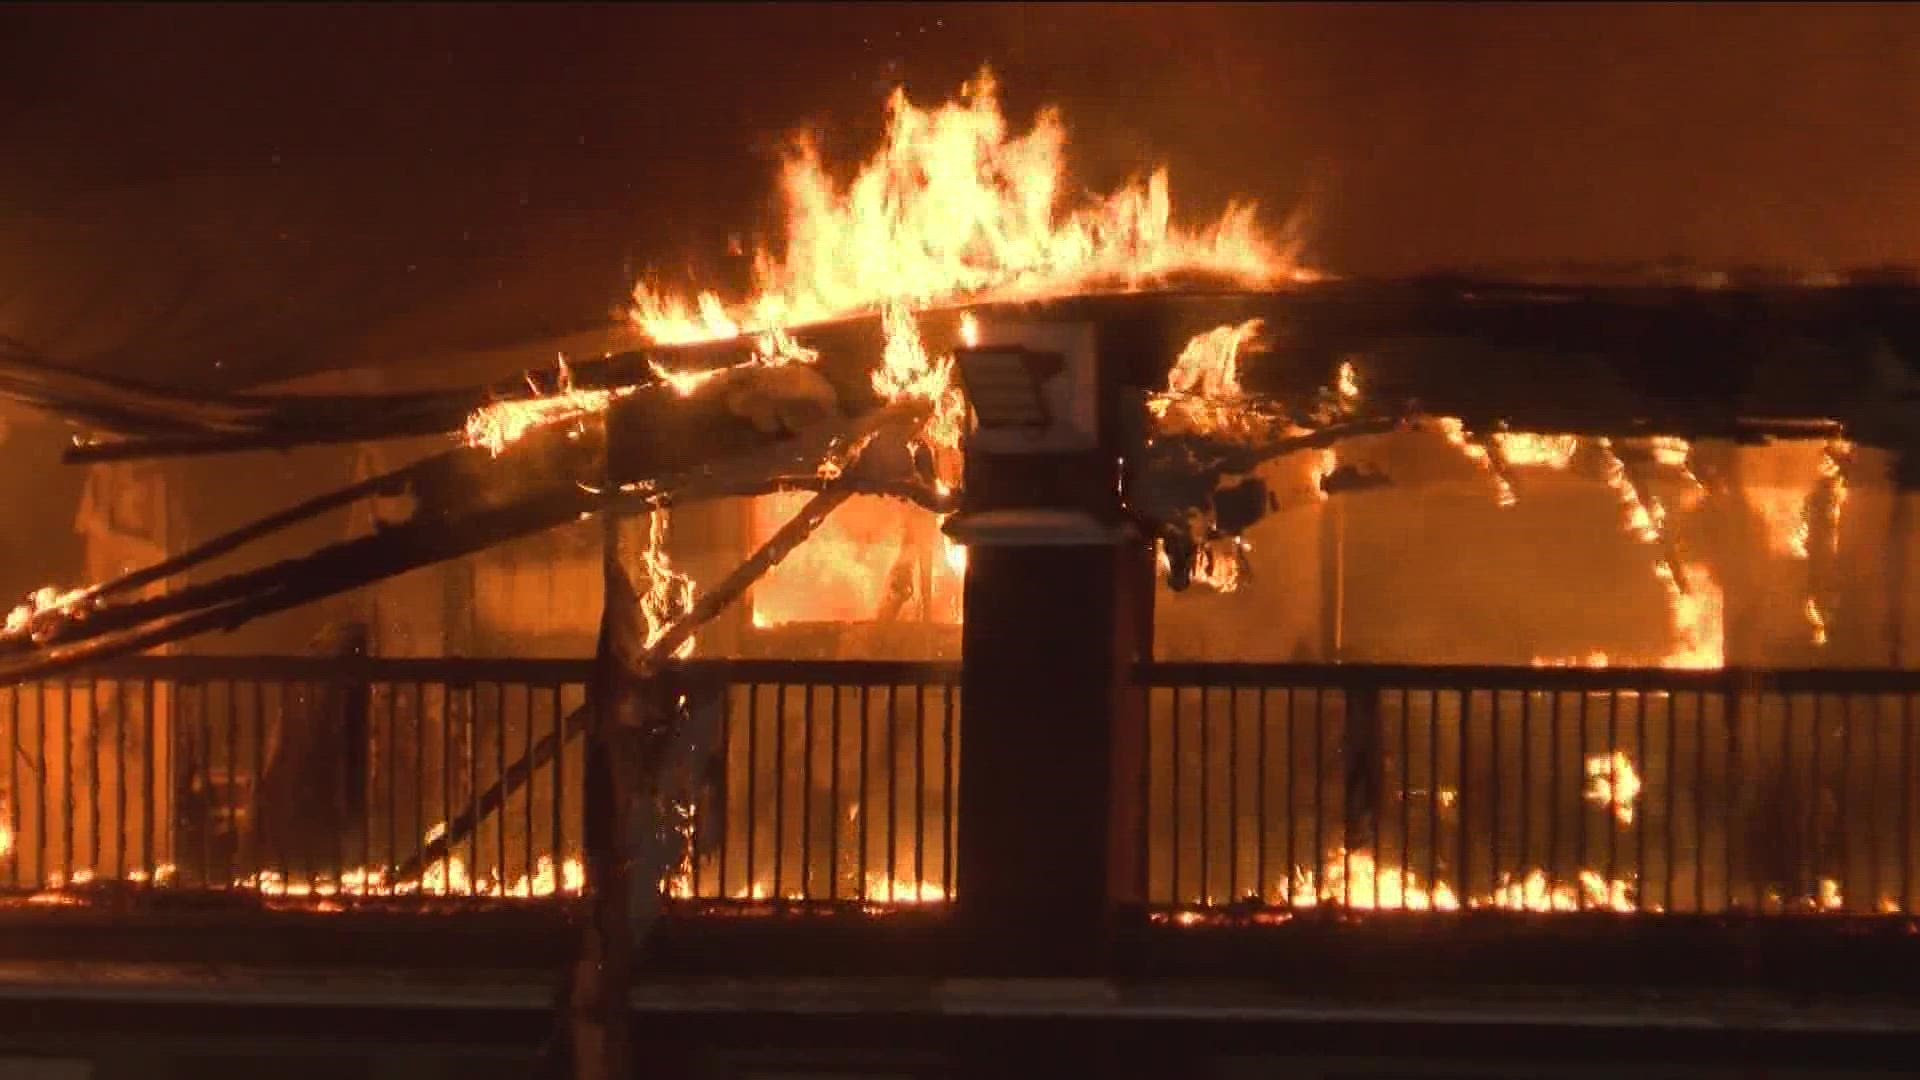 Kilgore motel engulfed in flames sees significant damages